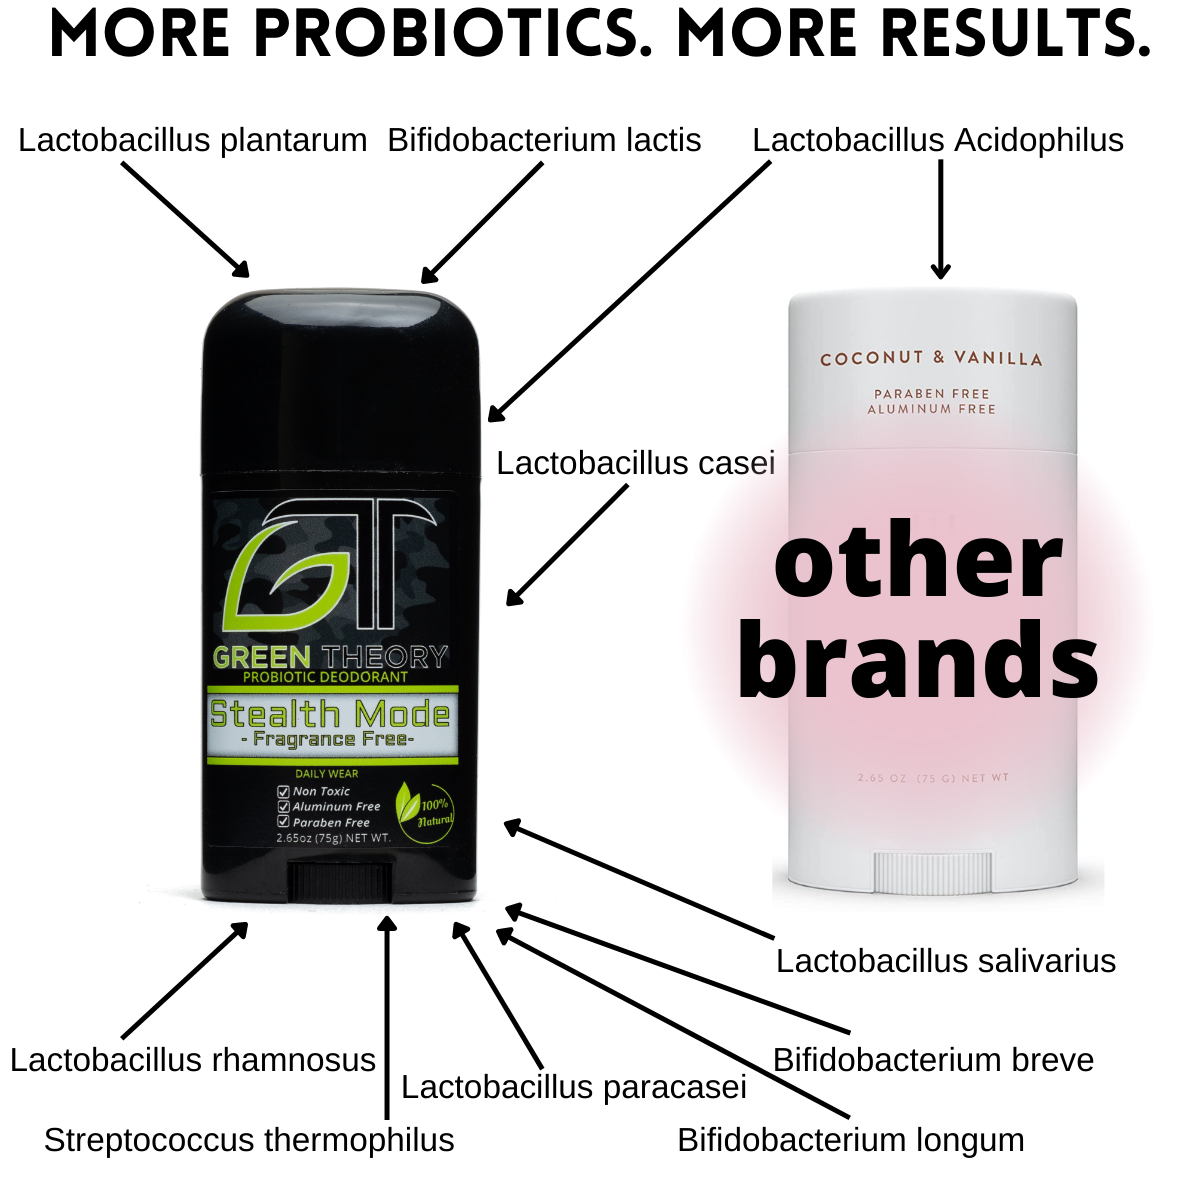 comparison photo of green theory stealth mode unscented deodorant comparing it to other probiotic deodorant brands with 10 strains of probiotics in green theory and only 1 in other brands